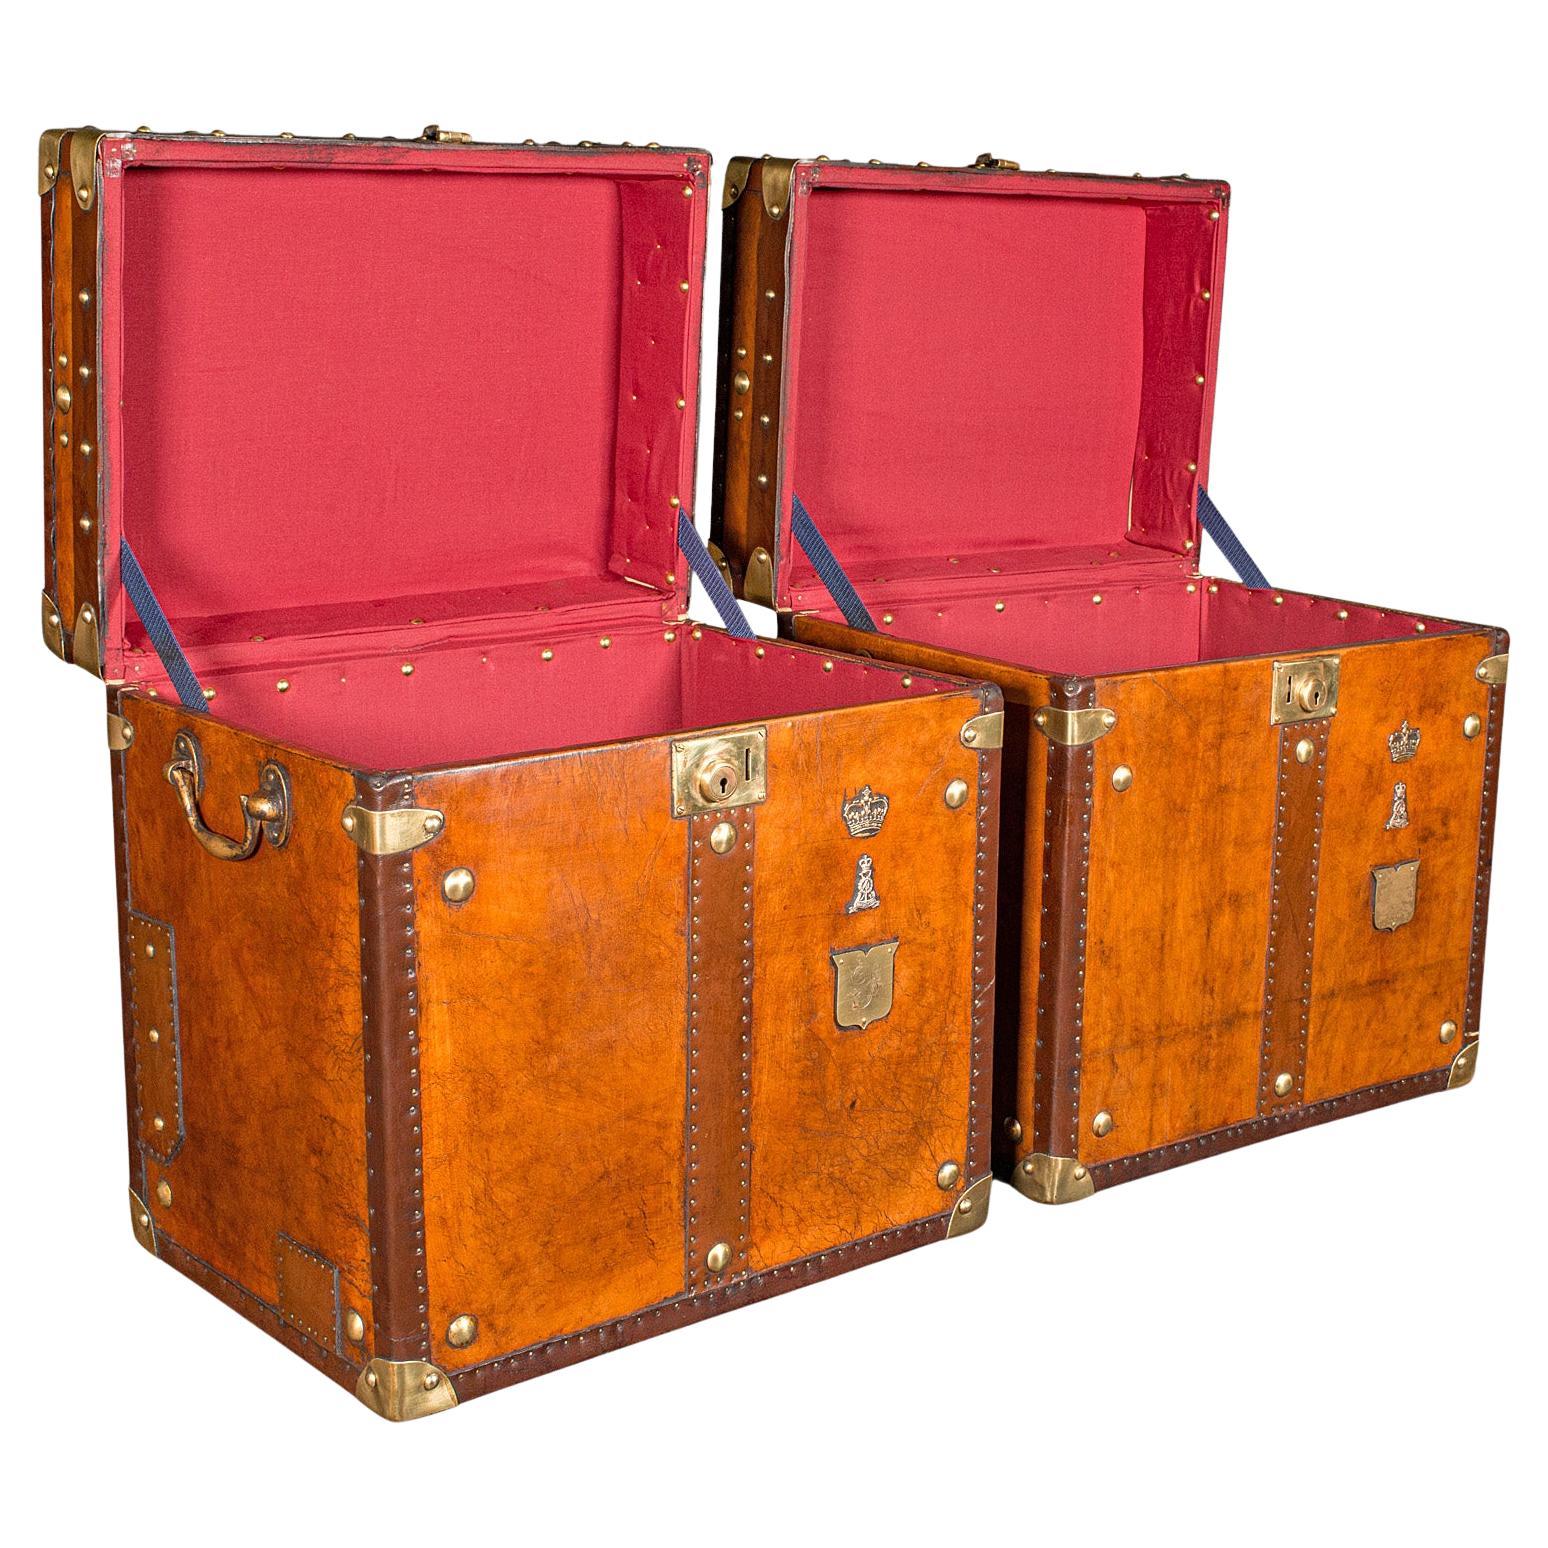 Pair Of Vintage Campaign Luggage Cases, English, Leather, Bedroom Nightstands For Sale